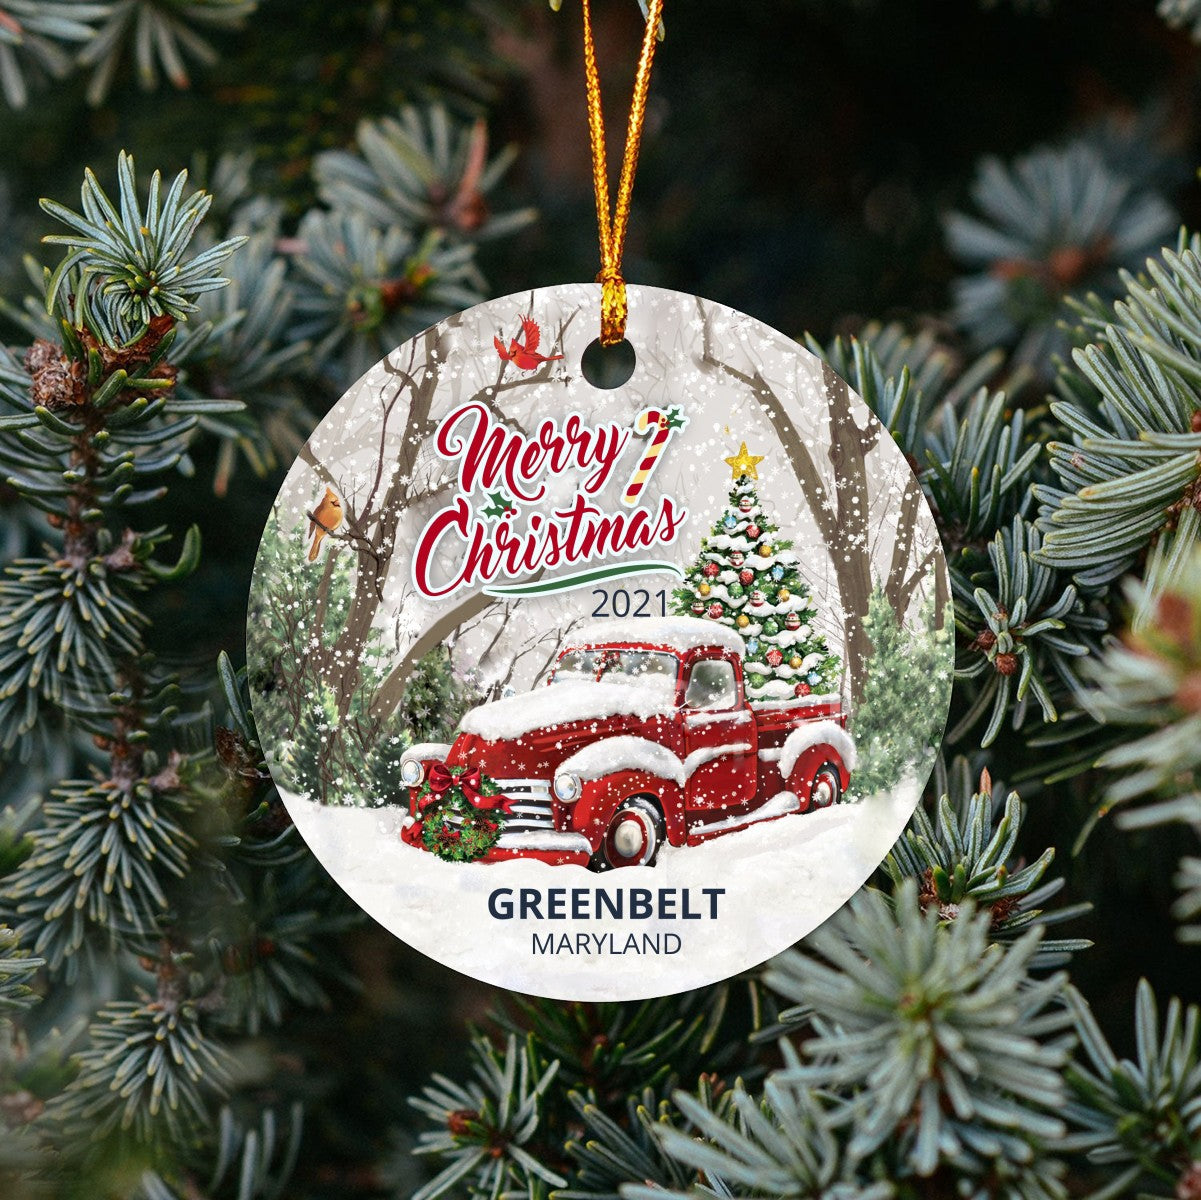 Christmas Tree Ornaments Greenbelt - Ornament With Name City, State Greenbelt Maryland MD Ornament - Red Truck Xmas Ornaments 3'' Plastic Gift For Family, Friend And Housewarming